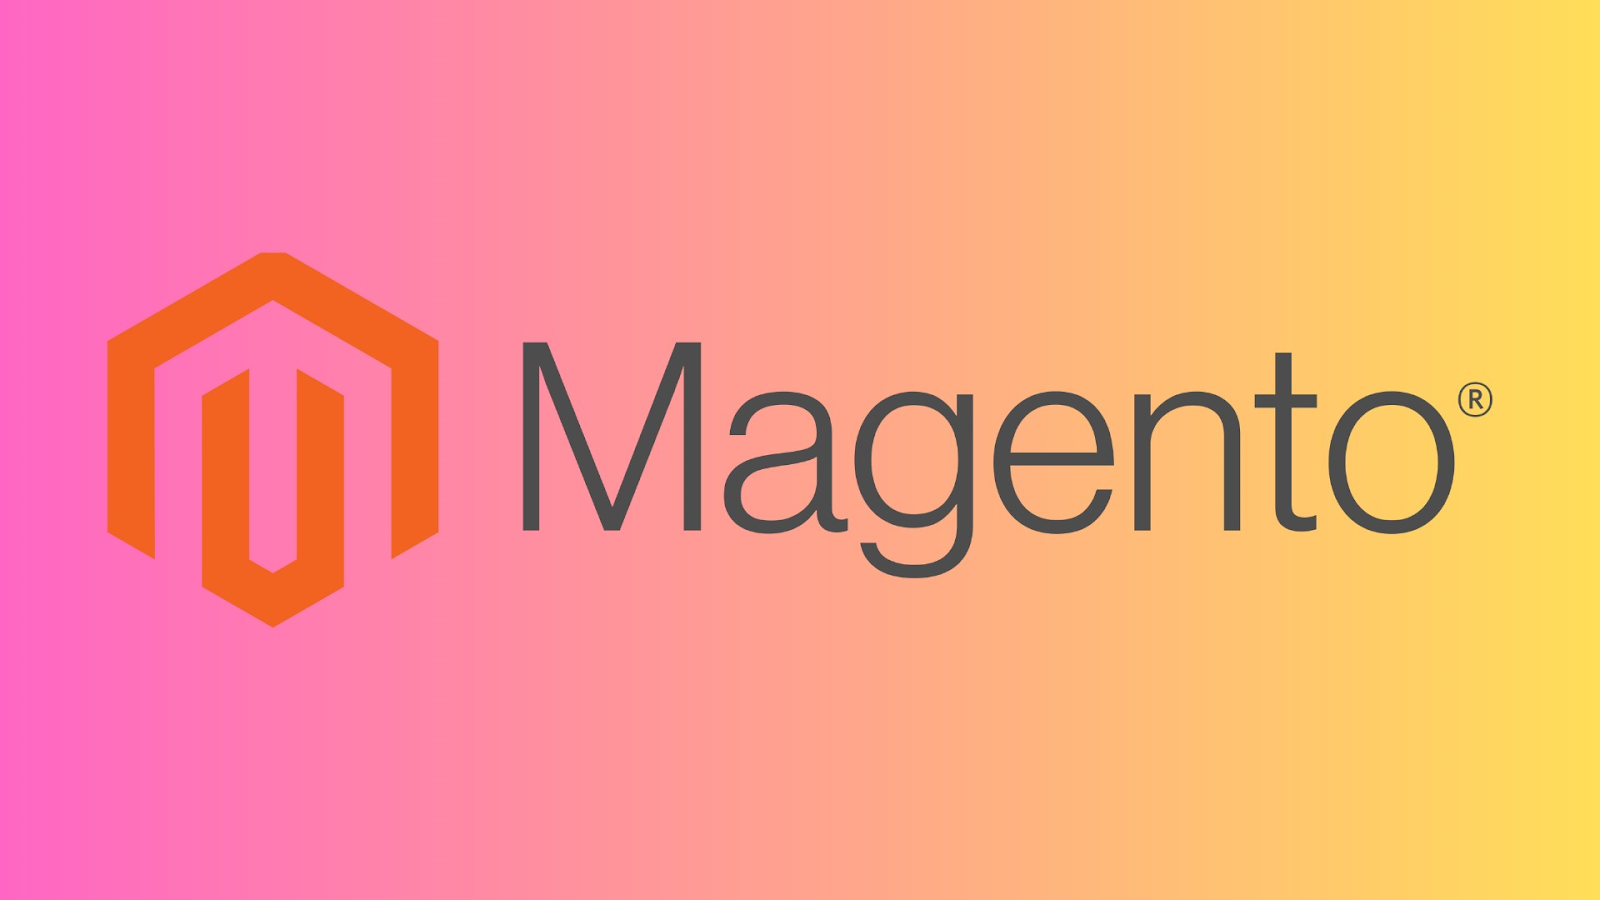 Magento is the best tool for ecommerce businesses